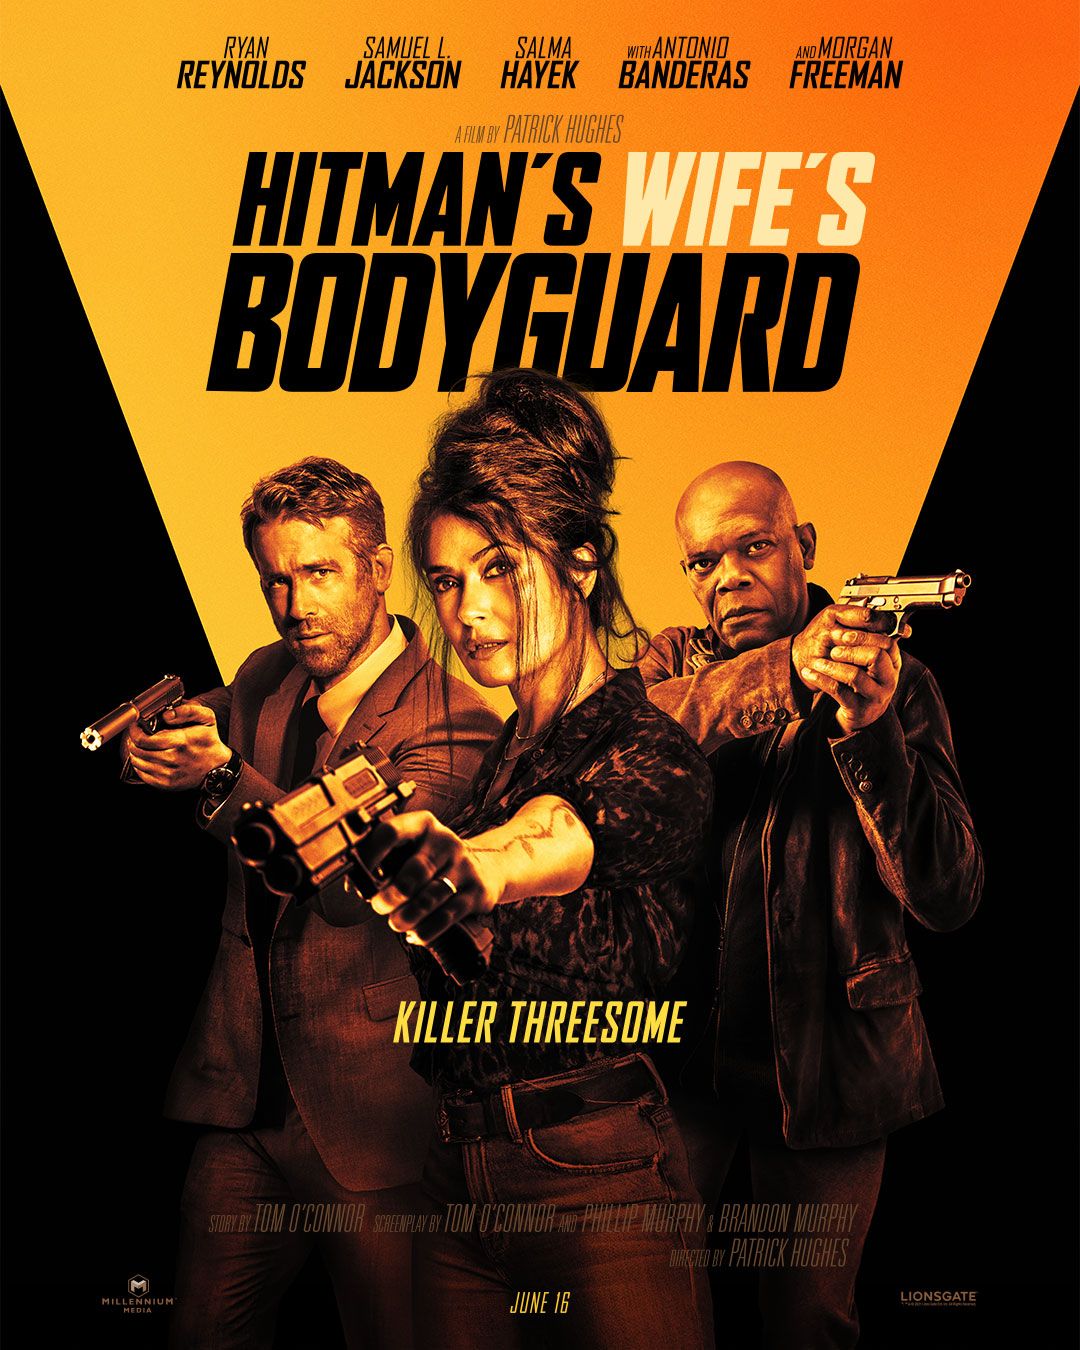 The Hitman's Wife's Bodyguard (2021) Posters (1 of 1)